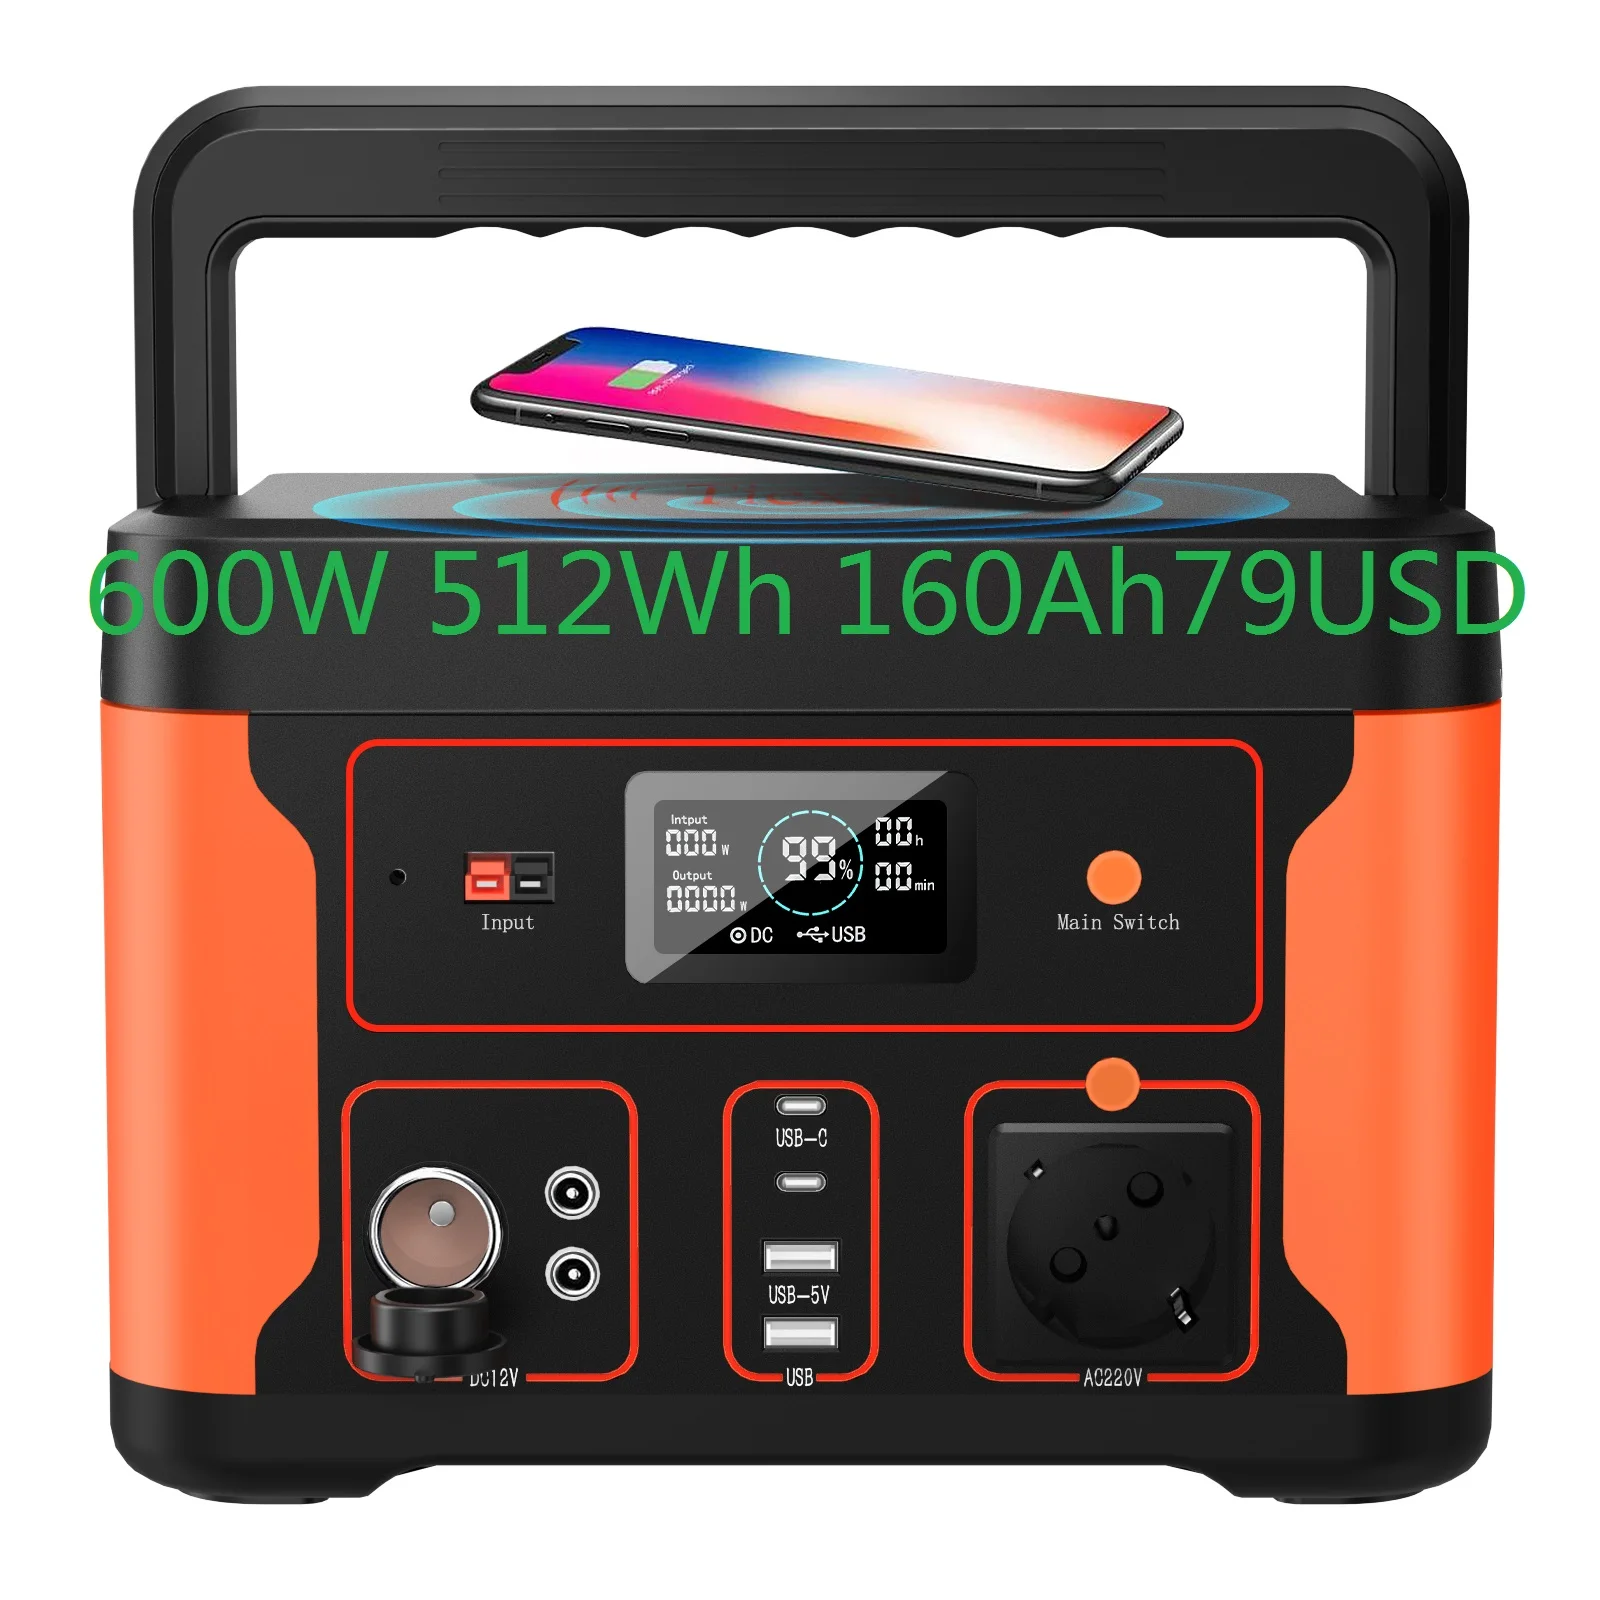 

USA Germany Warehouse 600W 512WH 160Ah Huge Capacity Camping Power Bank Outdoor Portable Power Banks &Portable Power Station